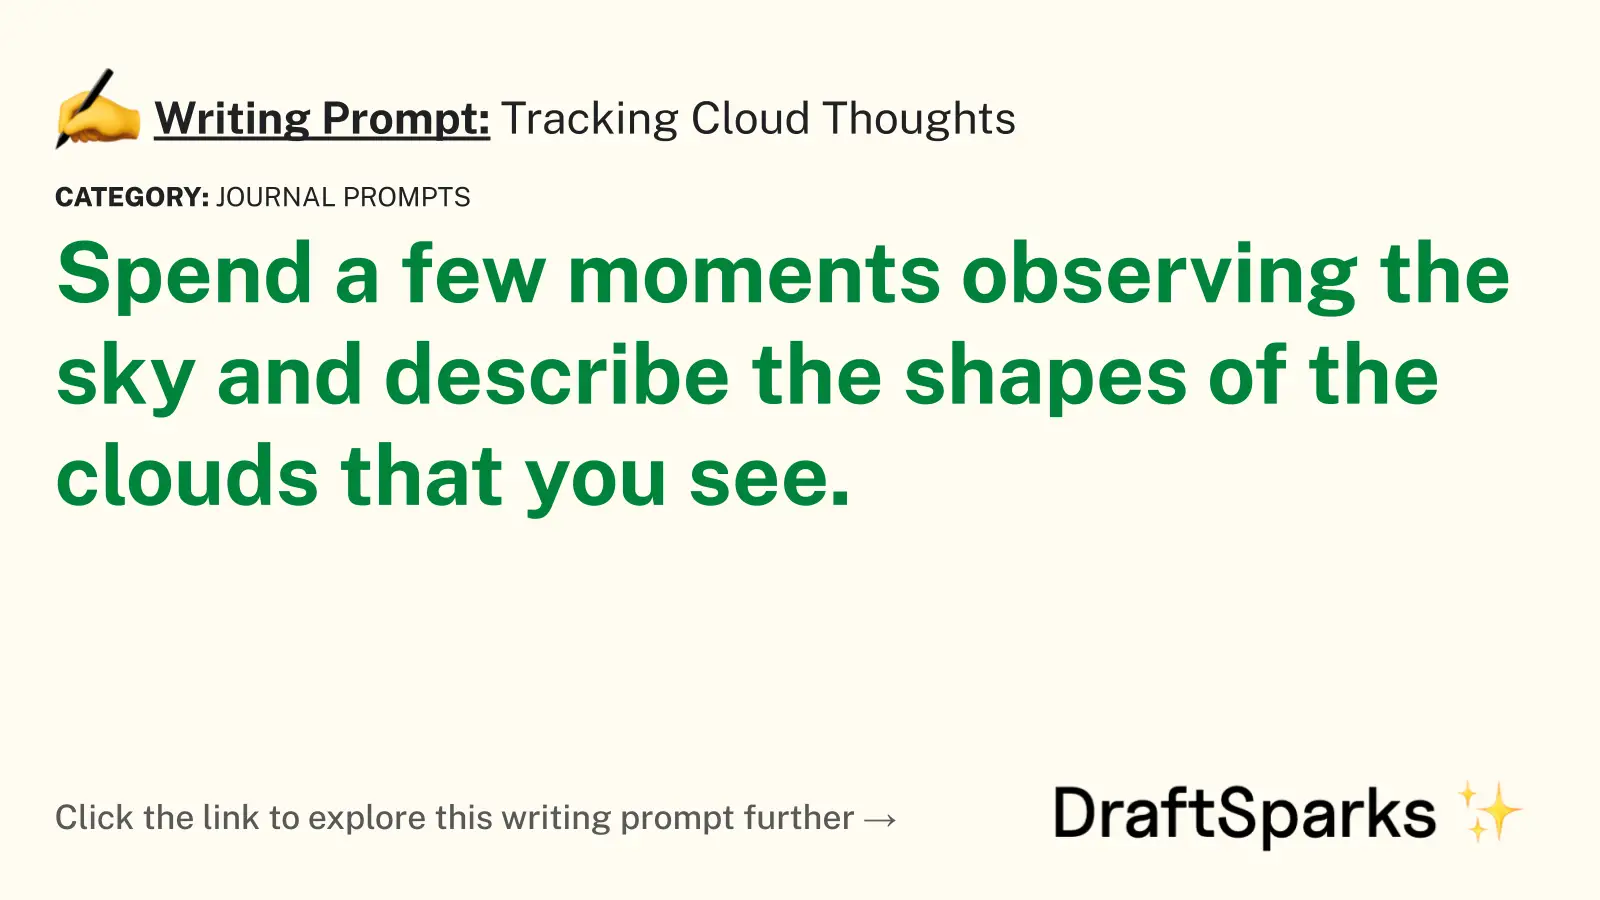 Tracking Cloud Thoughts